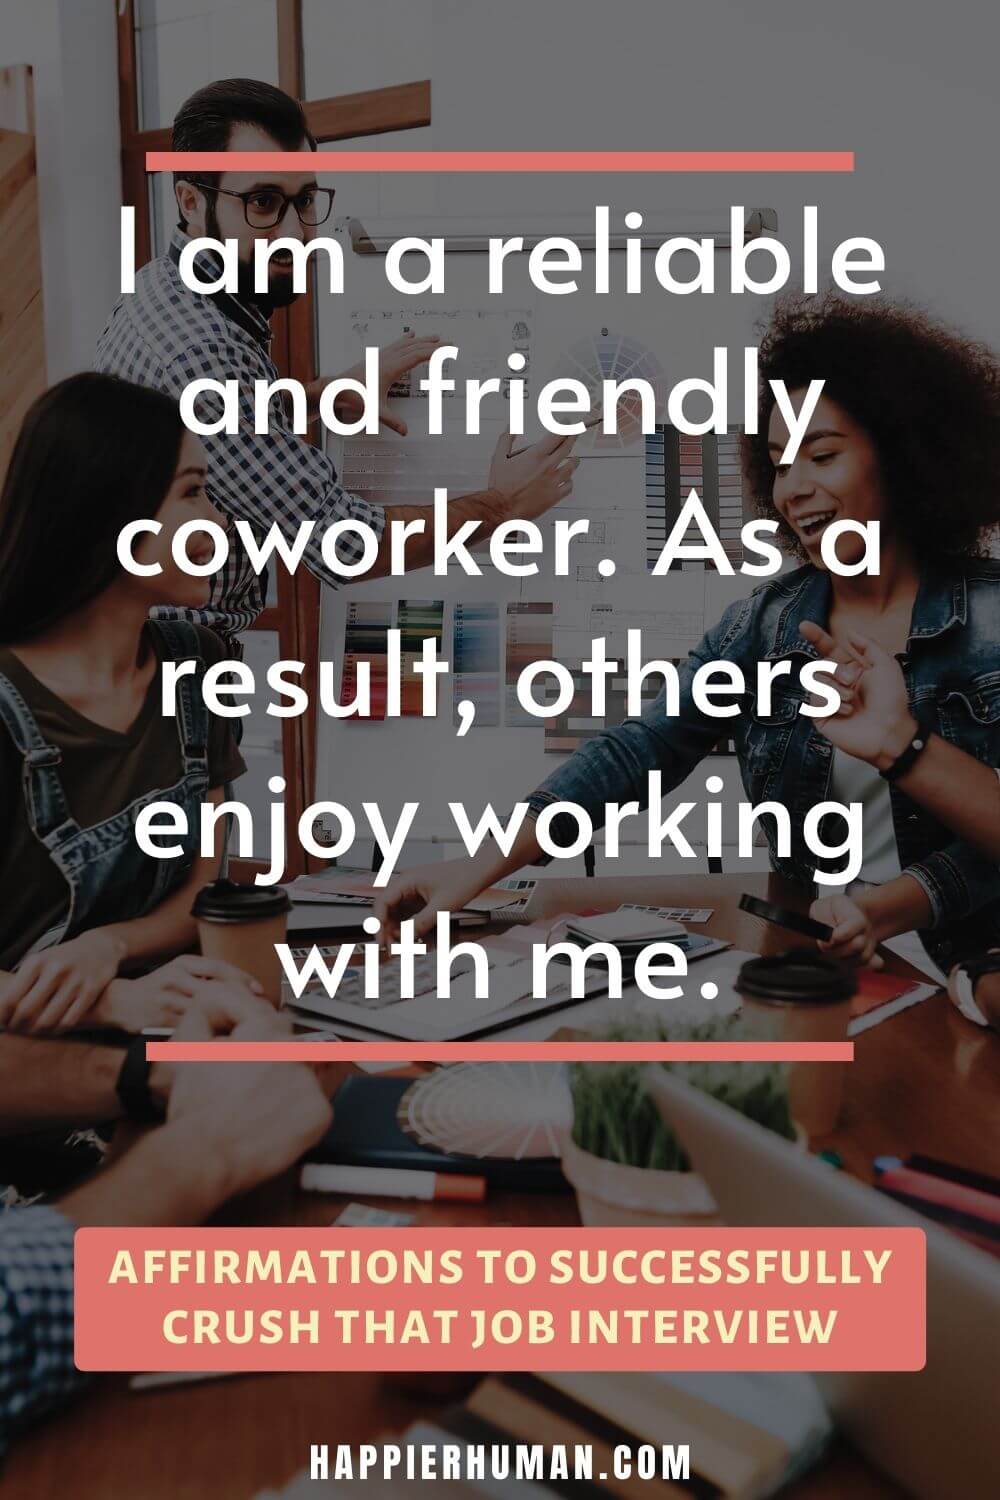 Affirmations for Job Interview - I am a reliable and friendly coworker. As a result, others enjoy working with me. | positive thoughts for a job interview | job interview questions | things to tell yourself before an interview